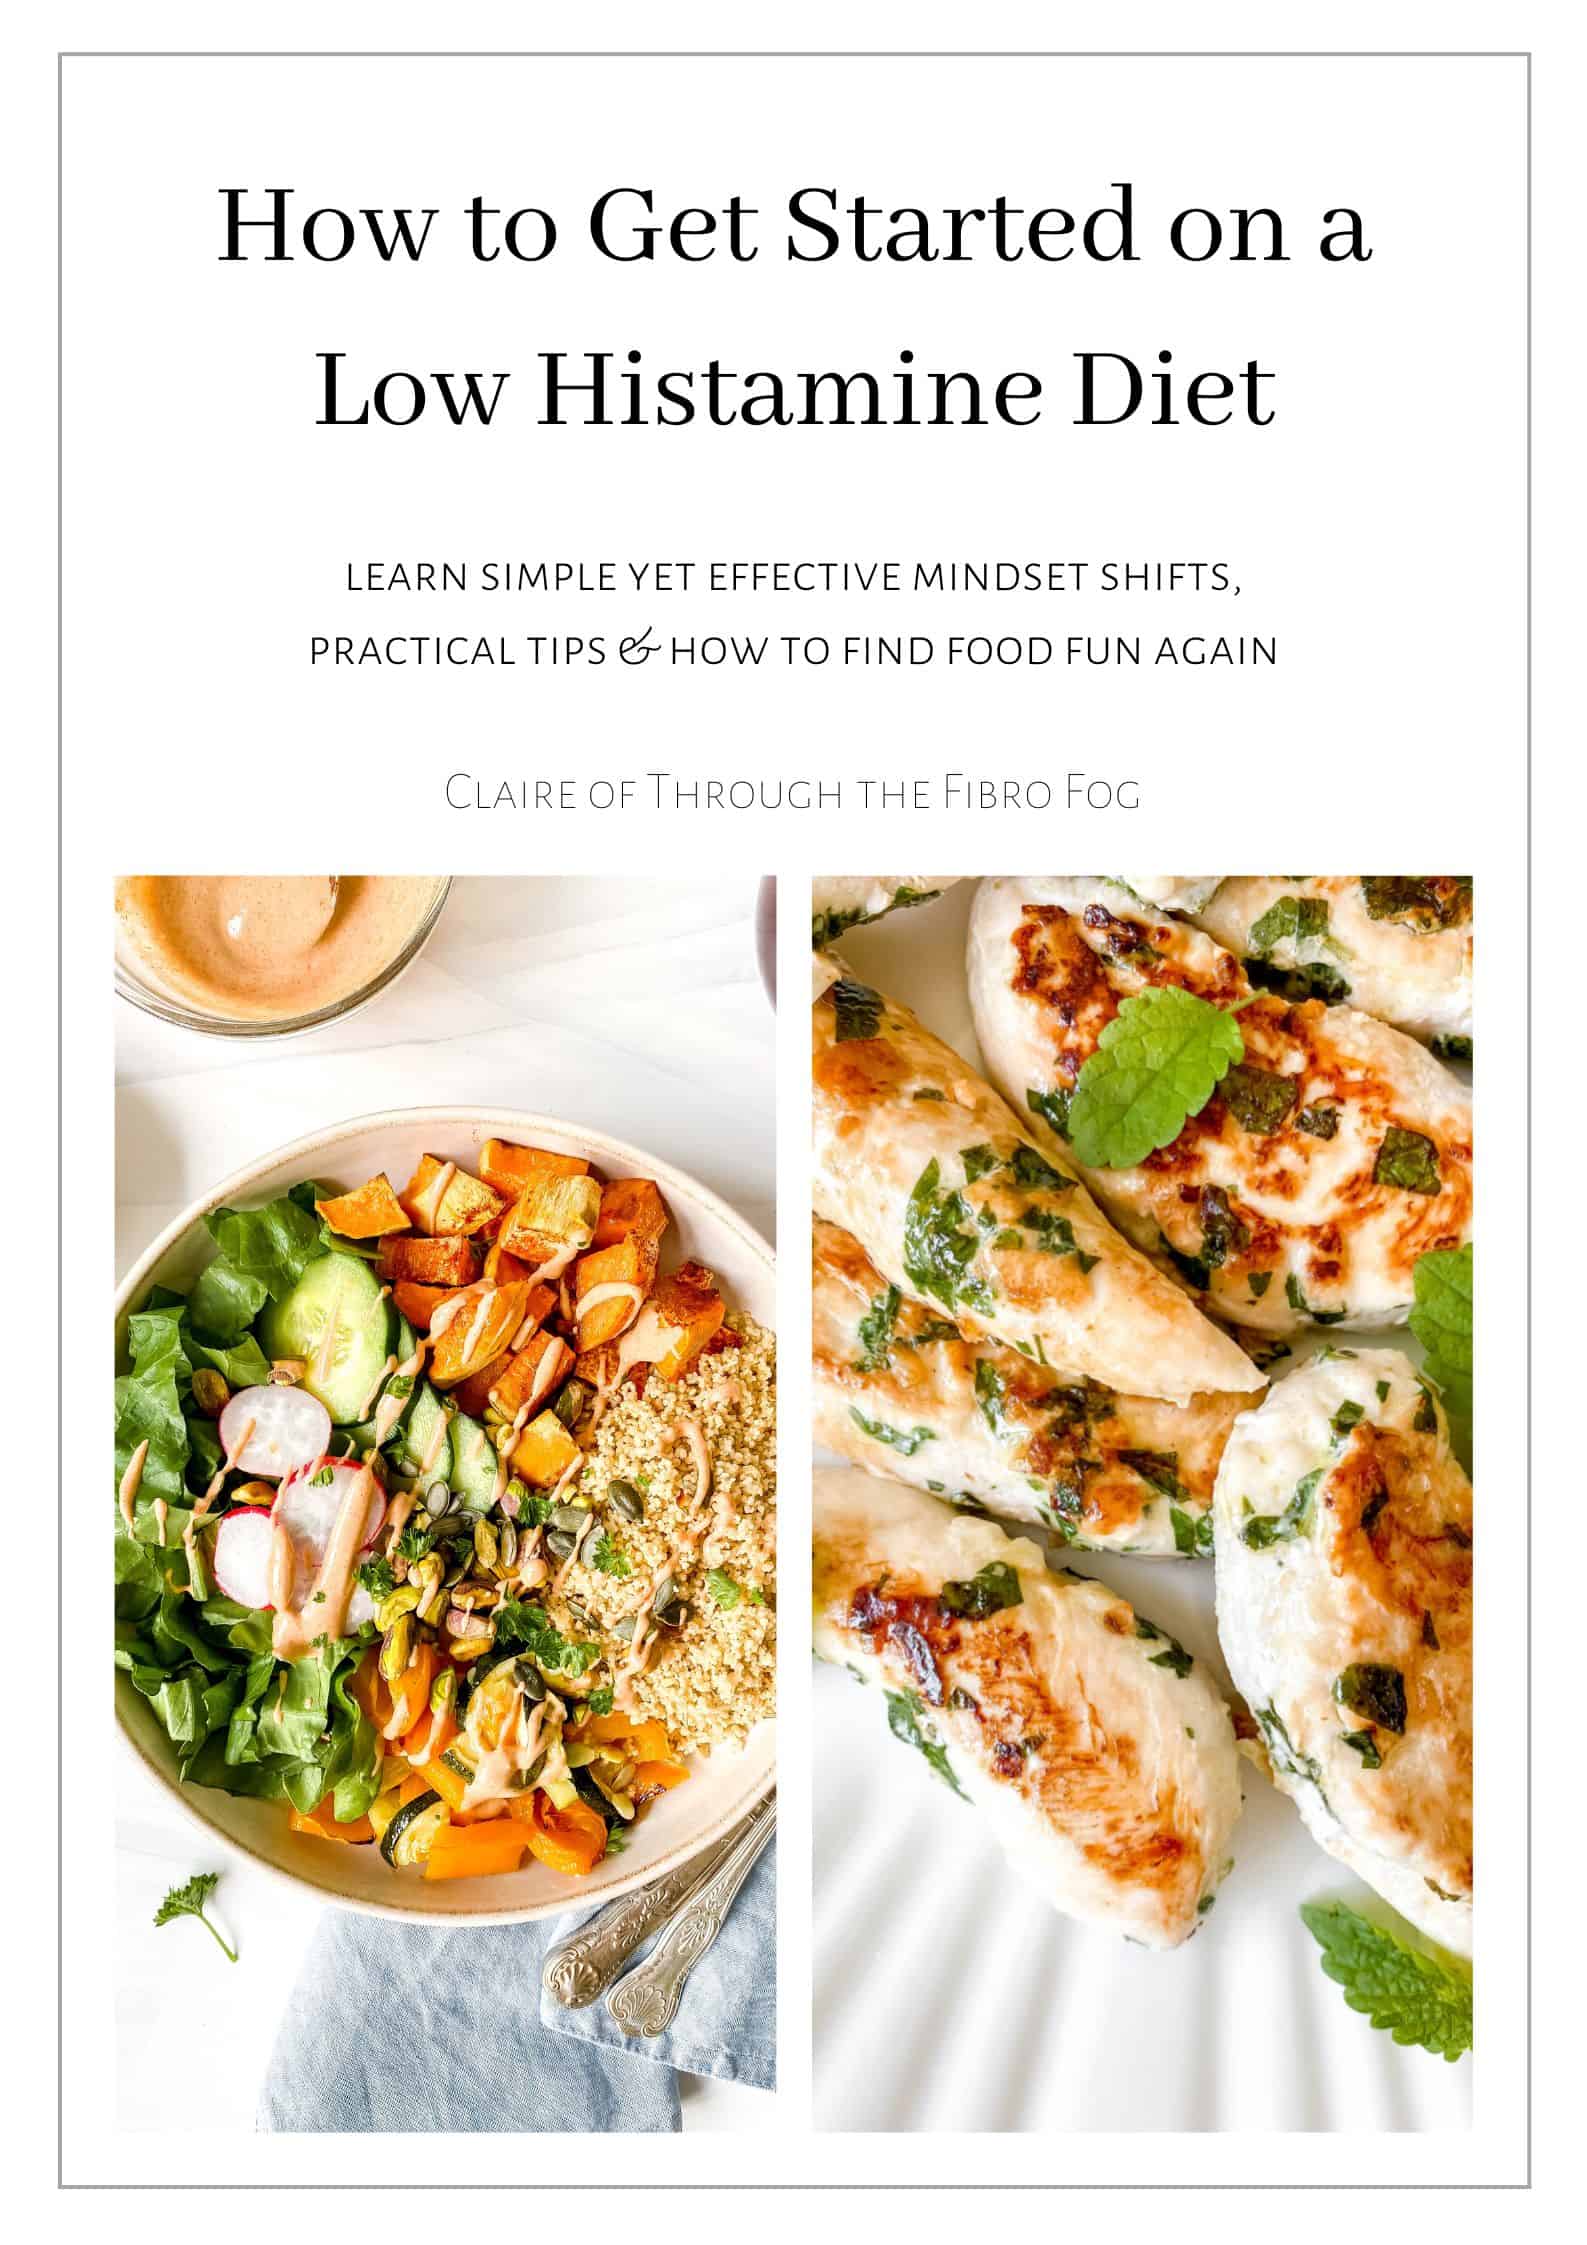 images of a buddha bowl and chicken with text how to get started on a low histamine diet.